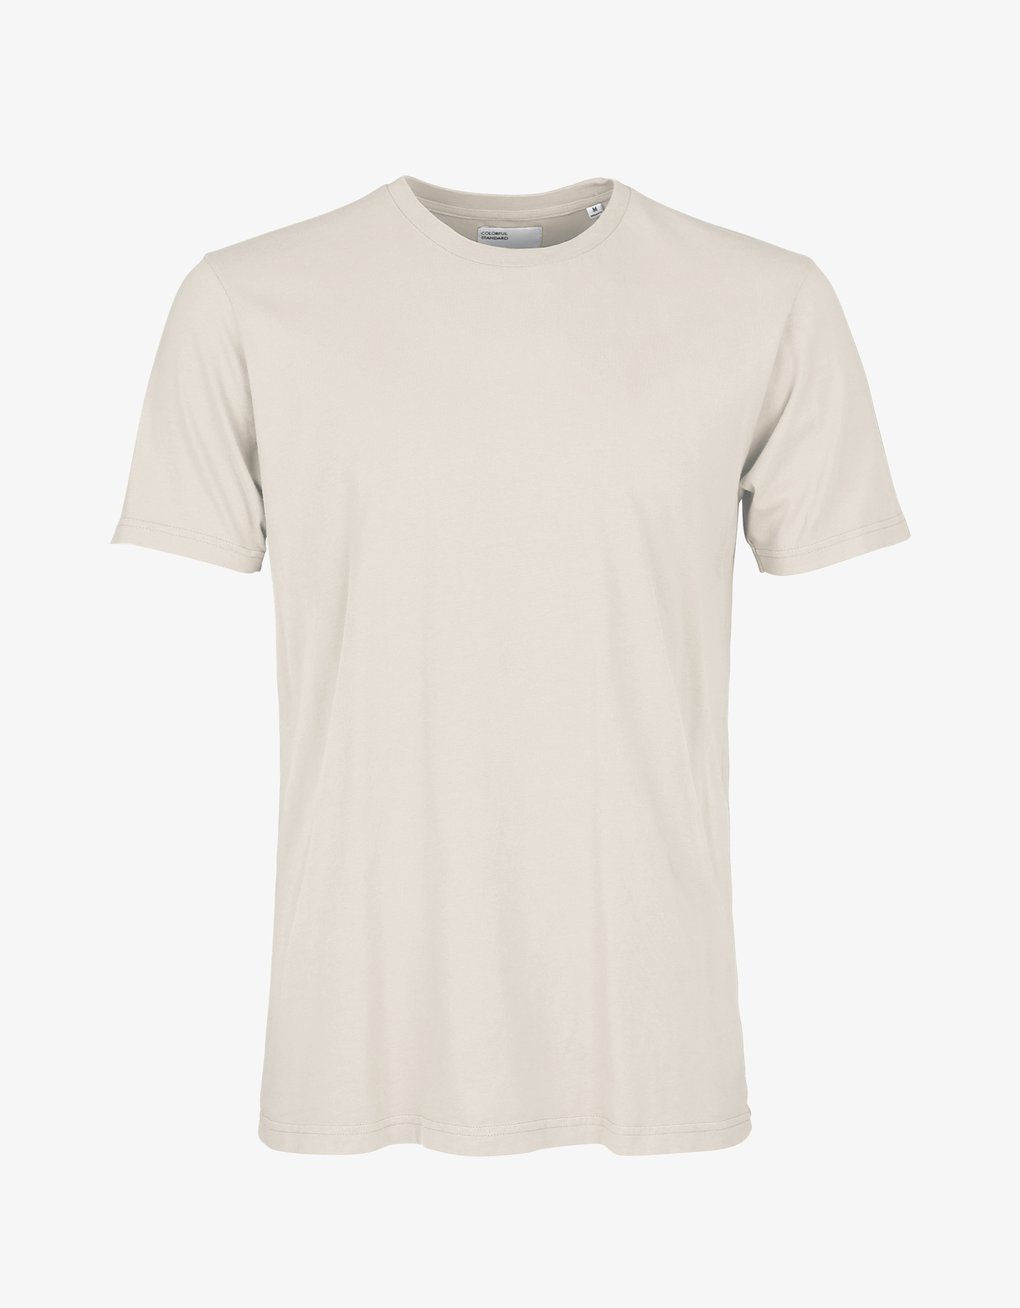 Colorful Standard Classic Organic Tee Ivory White mp